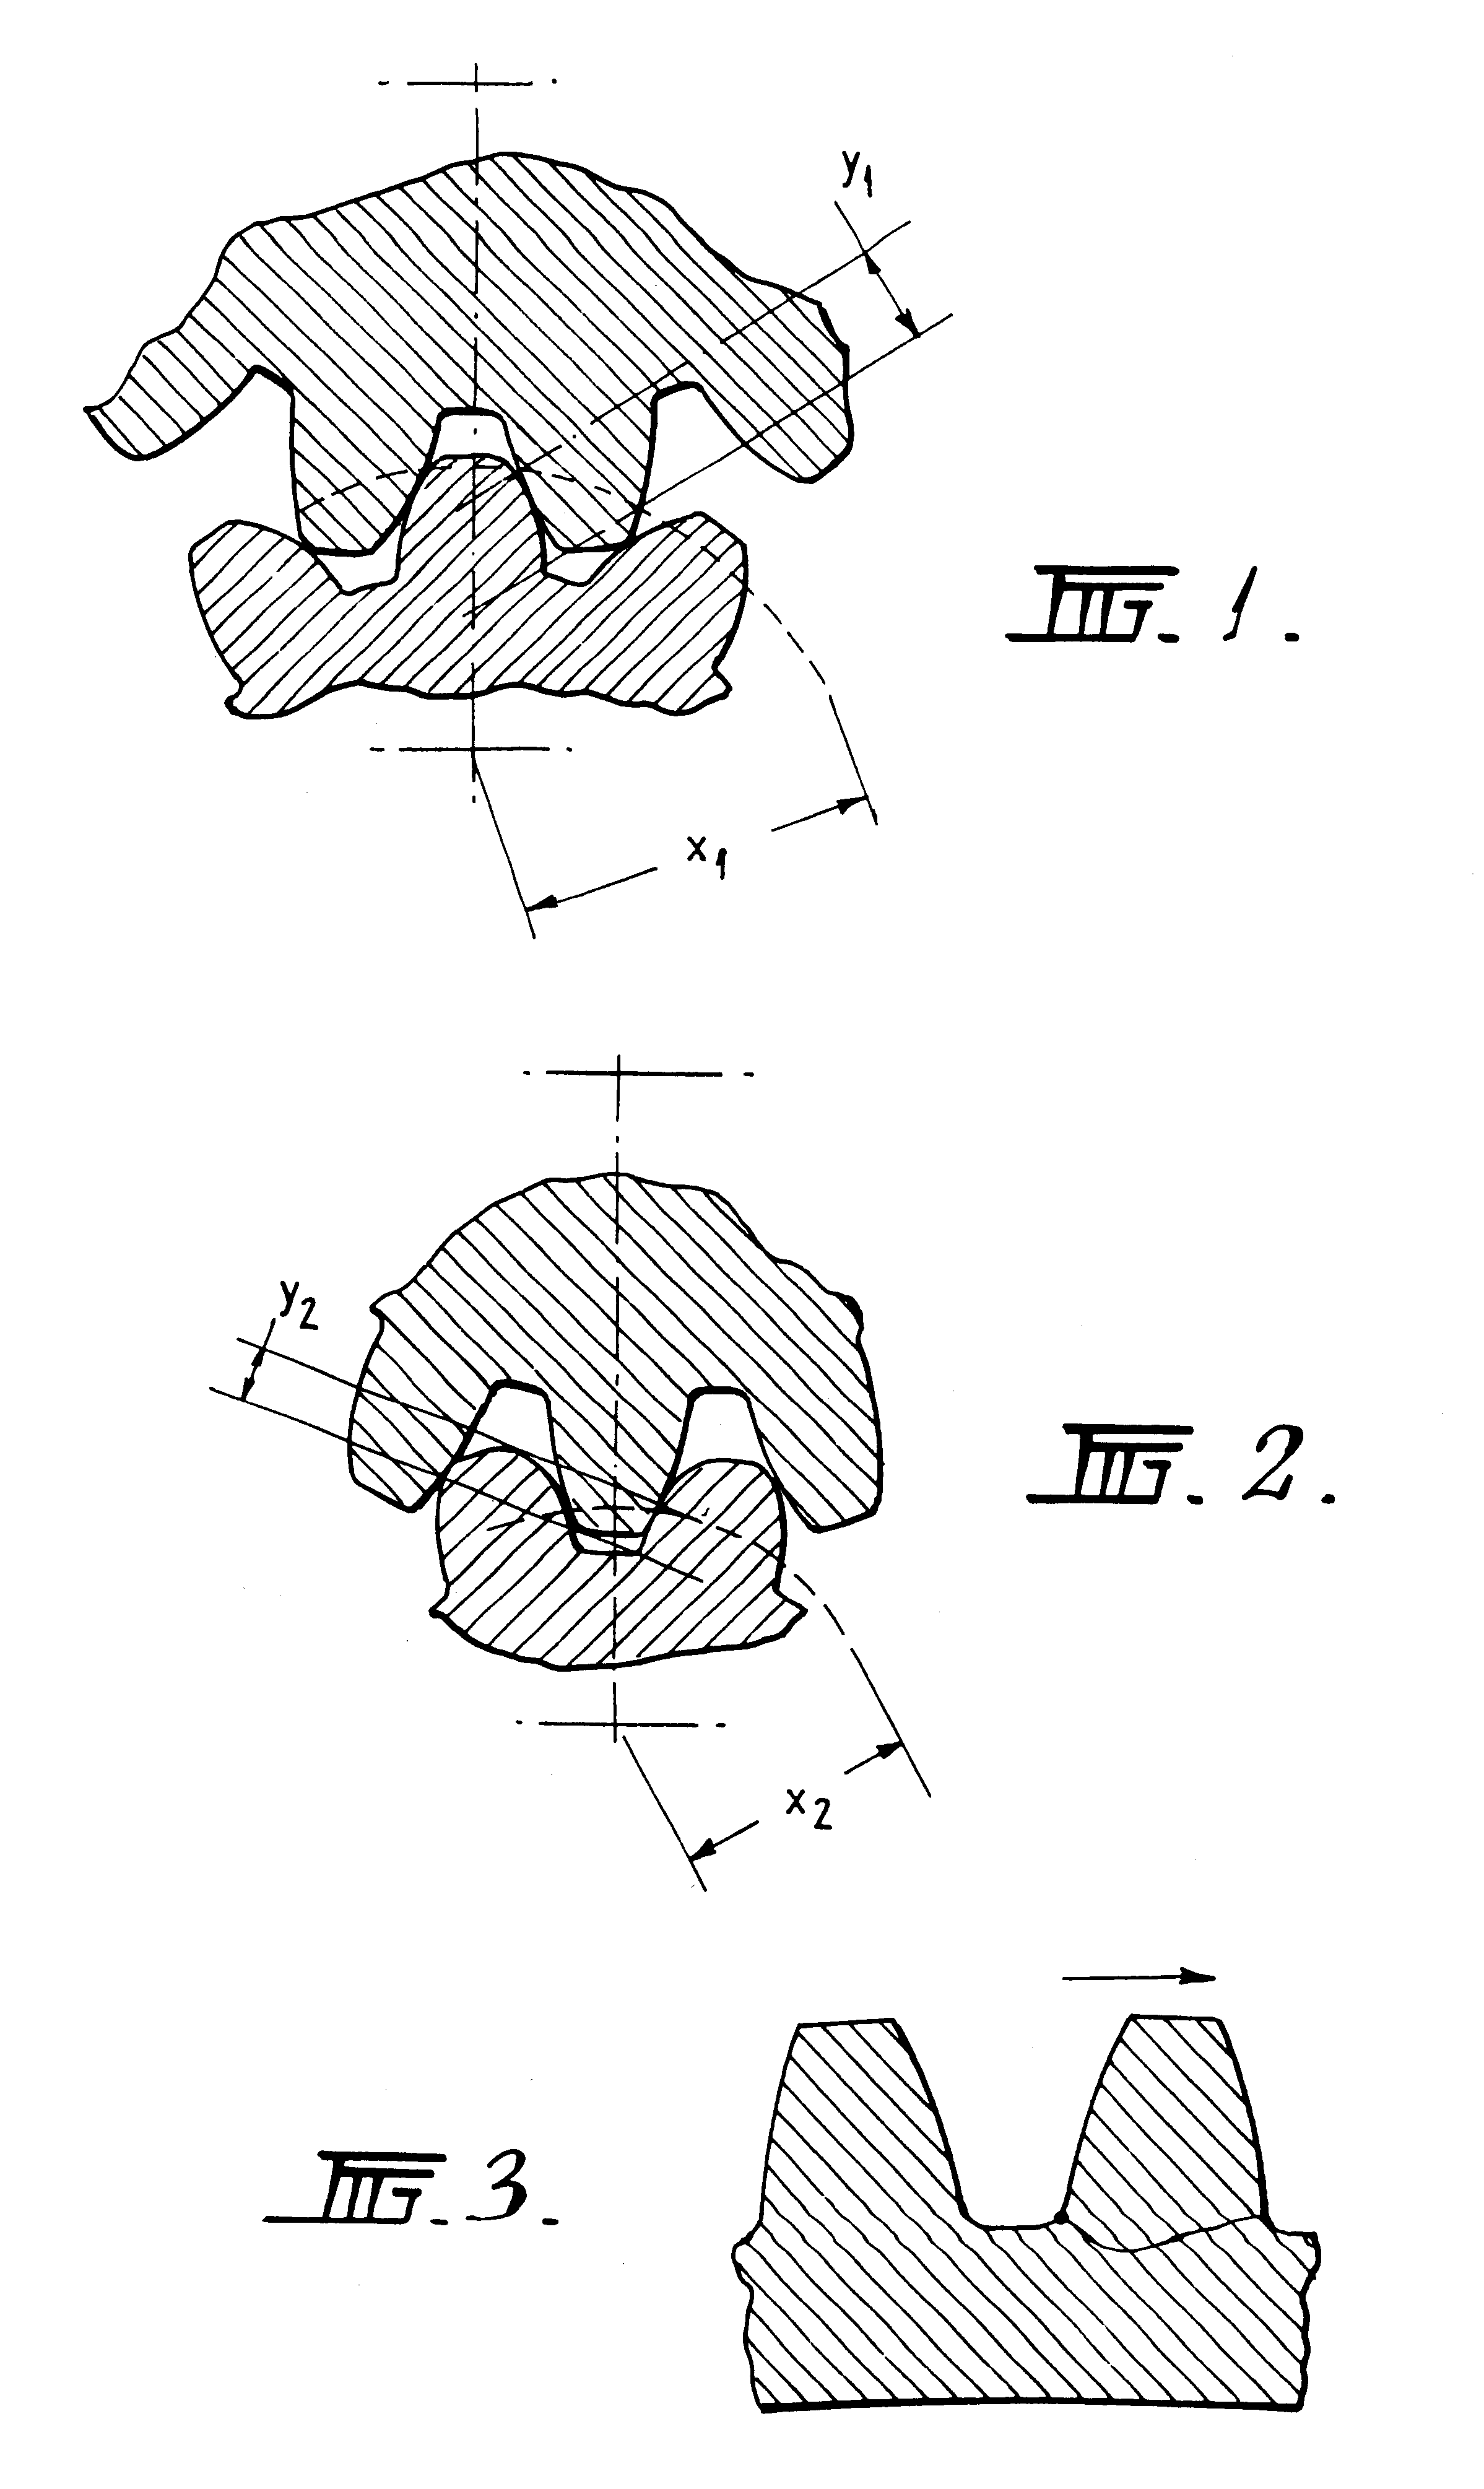 Locking differential with improved tooth meshing configuration